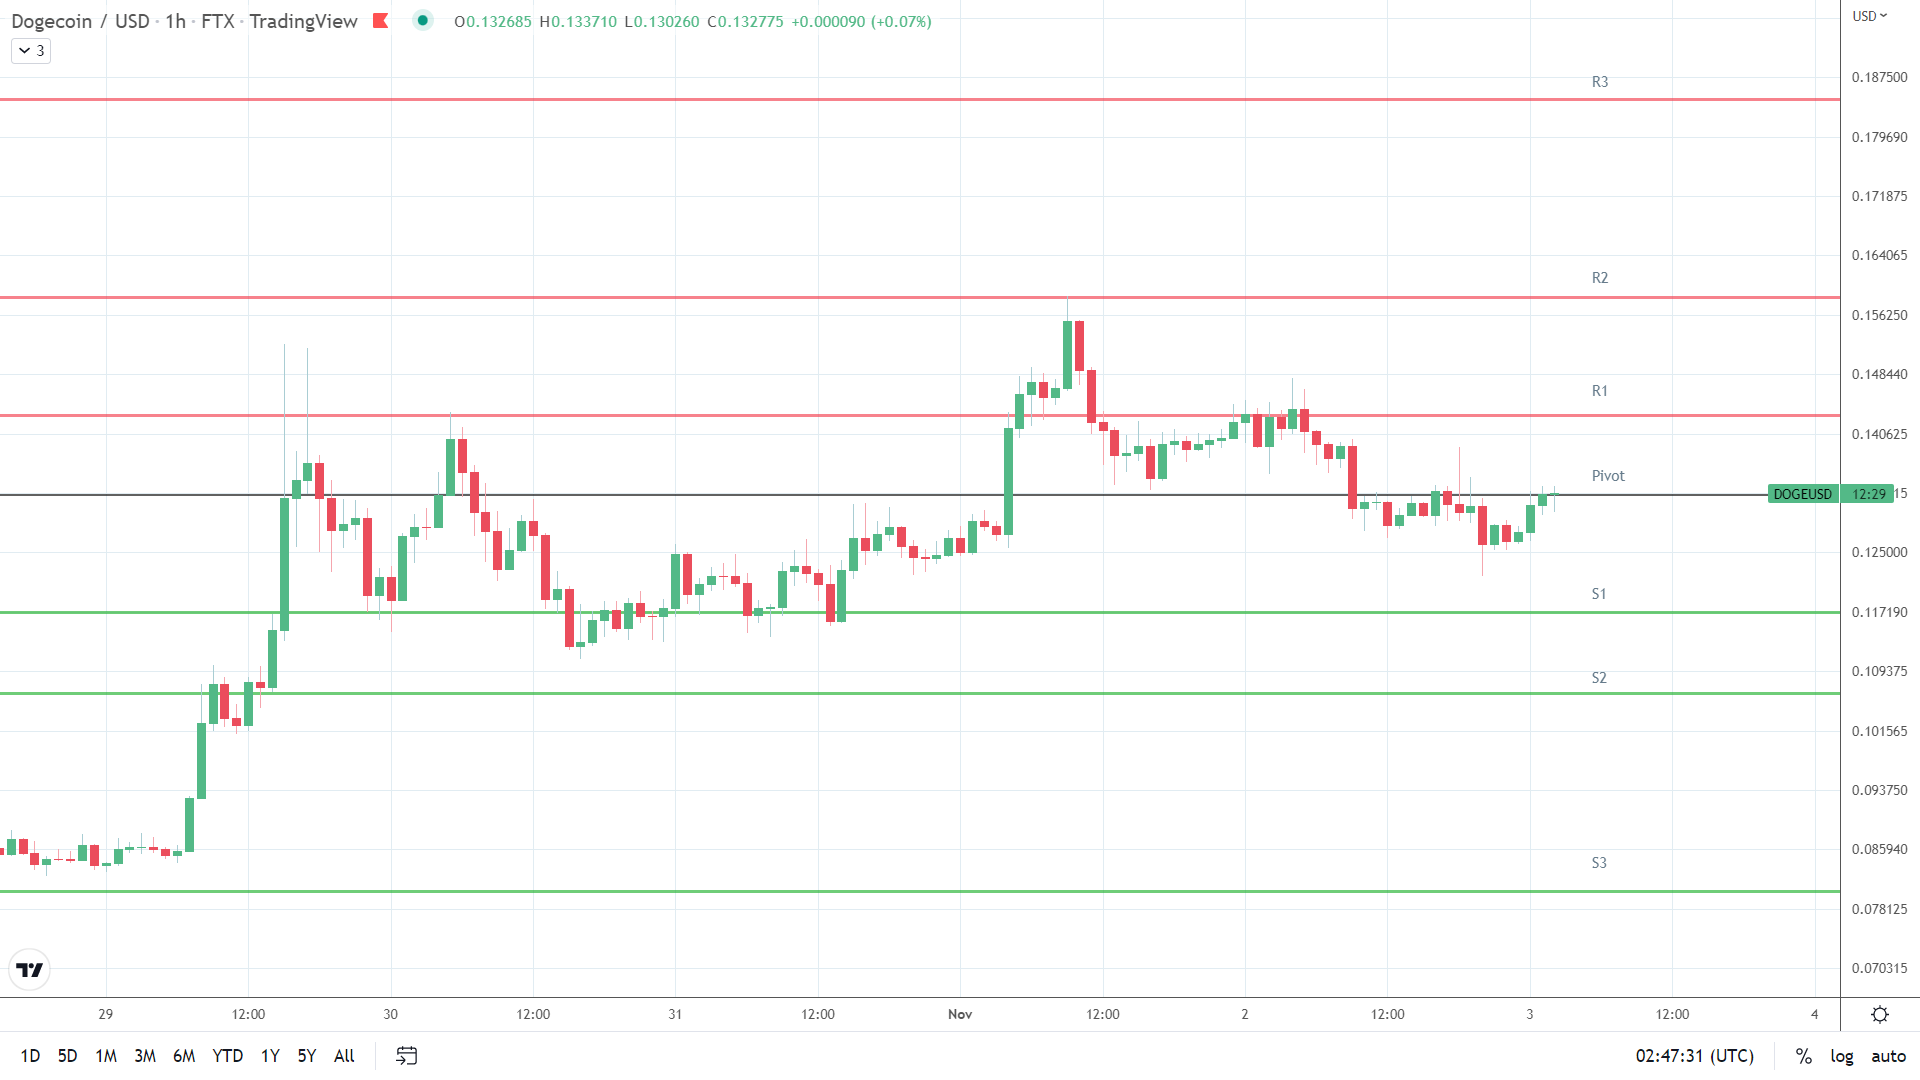 DOGE resistance levels in play above the pivot.